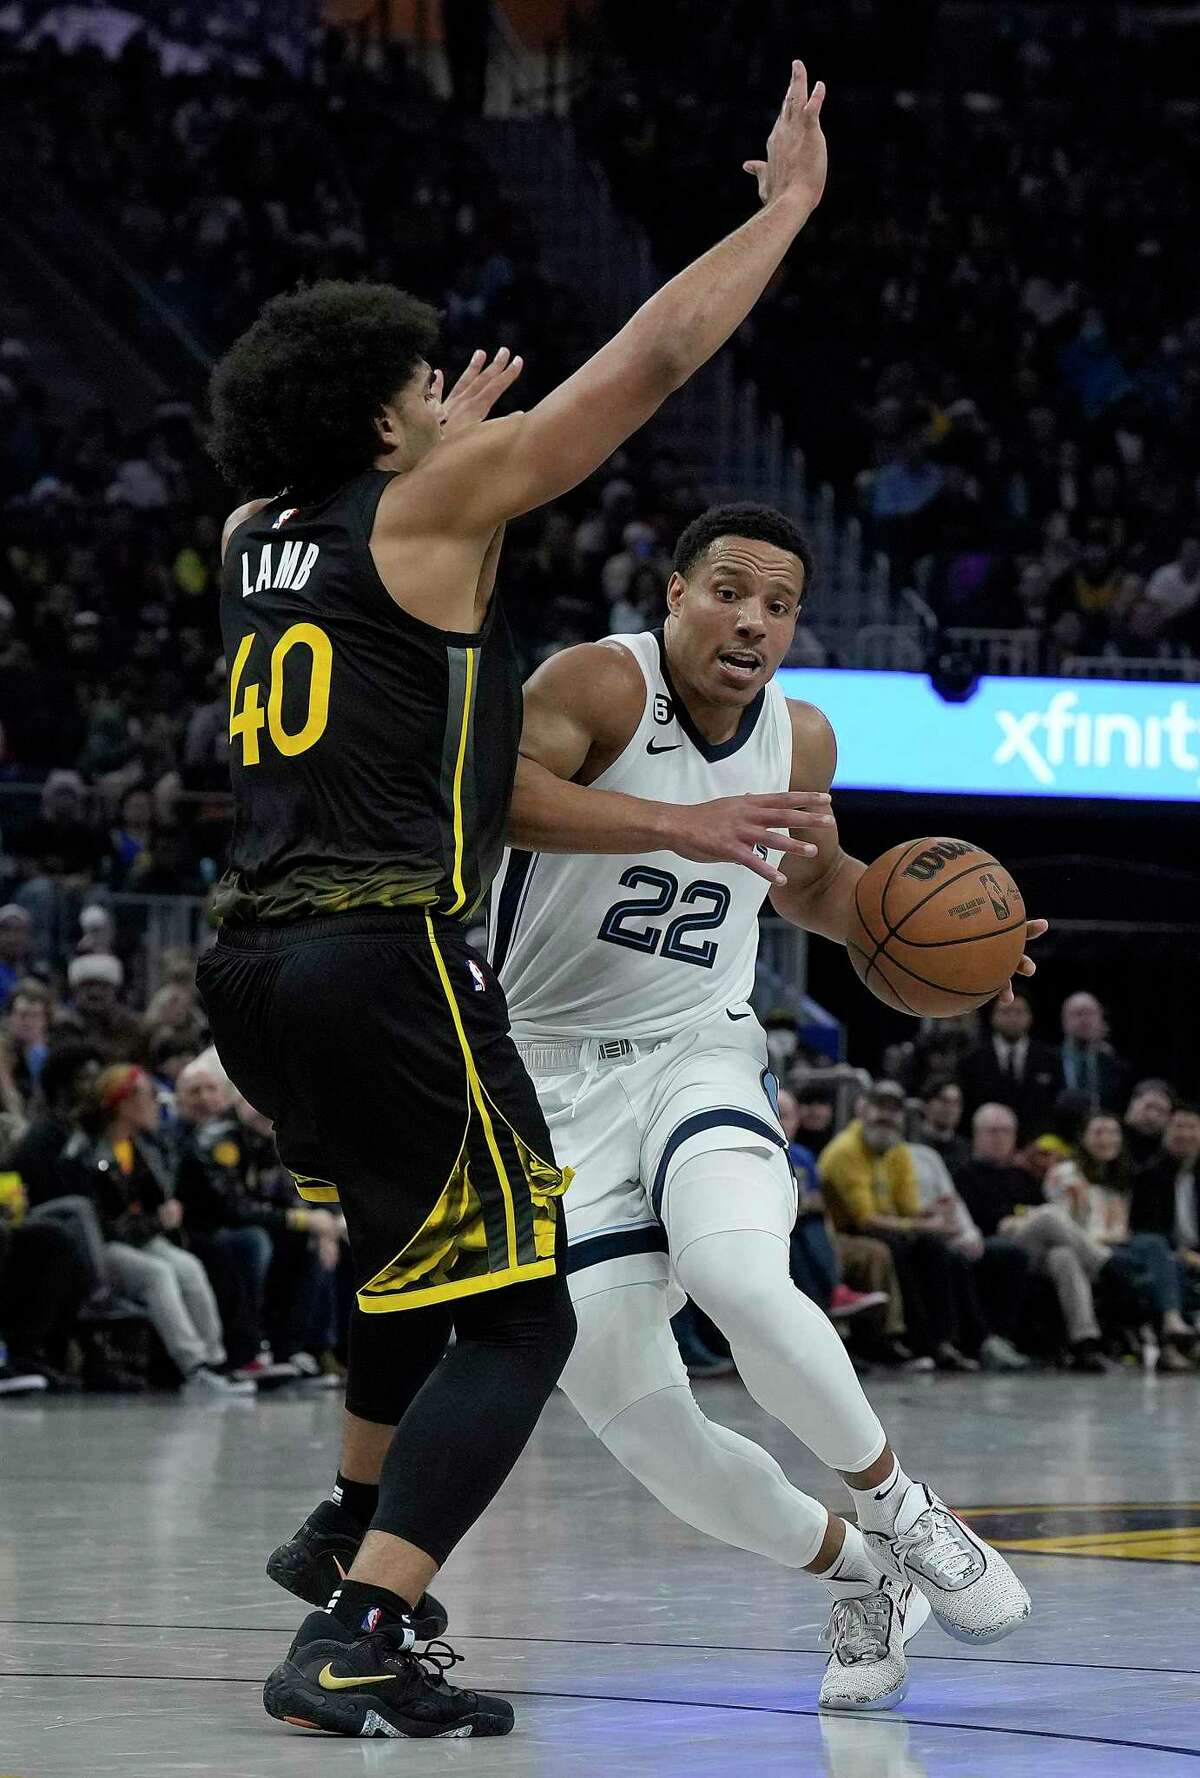 SAN FRANCISCO, CALIFORNIA - DECEMBER 25: Desmond Bane #22 of the Memphis Grizzlies drives and gets fouled by Anthony Lamb #40 of the Golden State Warriors during the third quarter at Chase Center on December 25, 2022 in San Francisco, California. NOTE TO USER: User expressly acknowledges and agrees that, by downloading and or using this photograph, User is consenting to the terms and conditions of the Getty Images License Agreement. (Photo by Thearon W. Henderson/Getty Images)